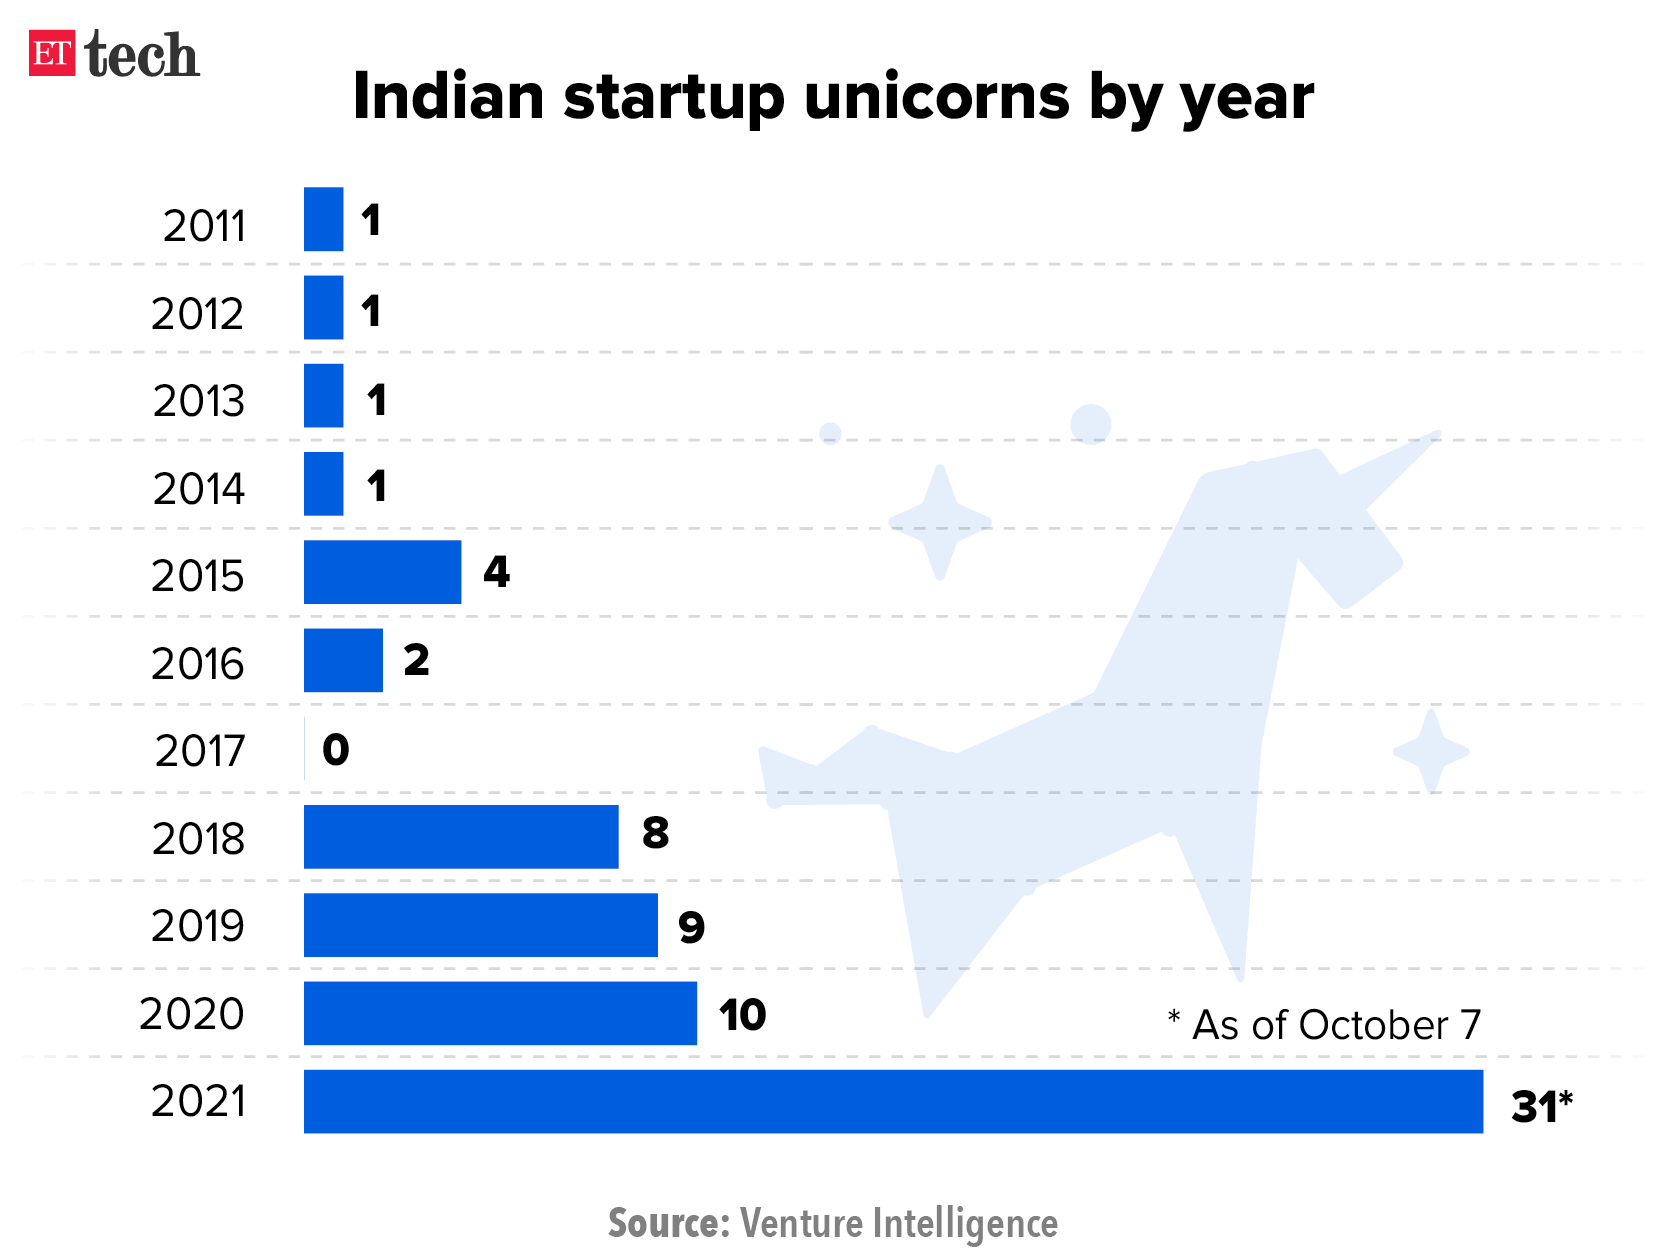 Indian startup unicorns by year